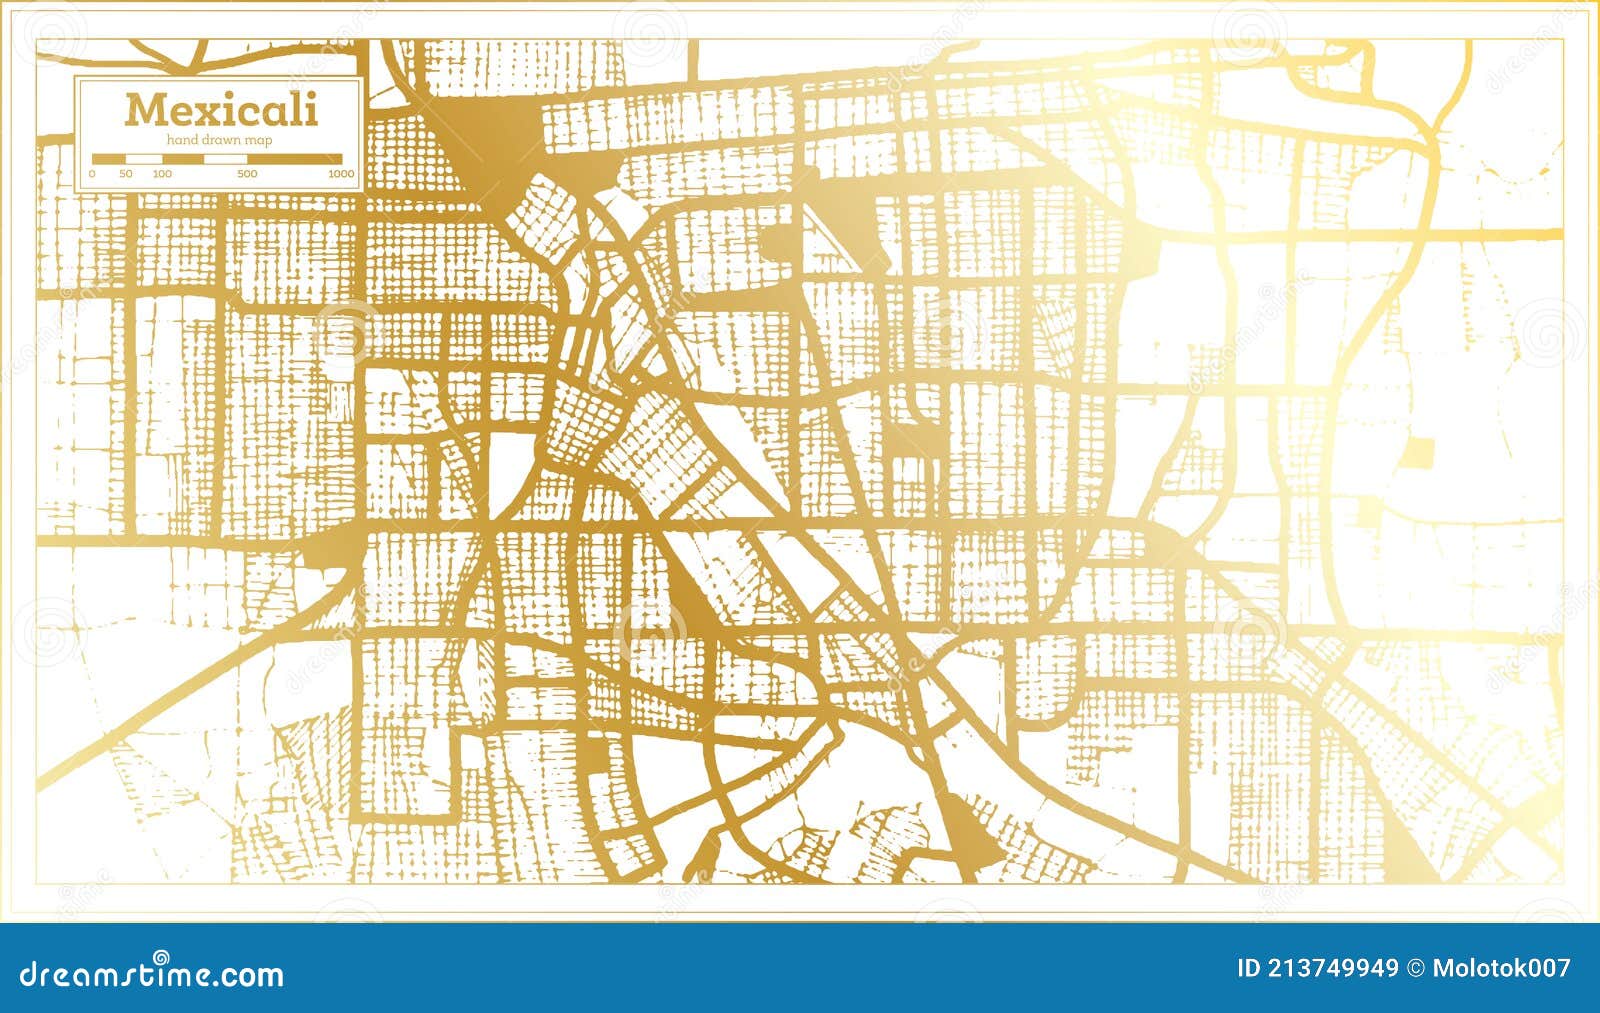 mexicali mexico city map in retro style in golden color. outline map